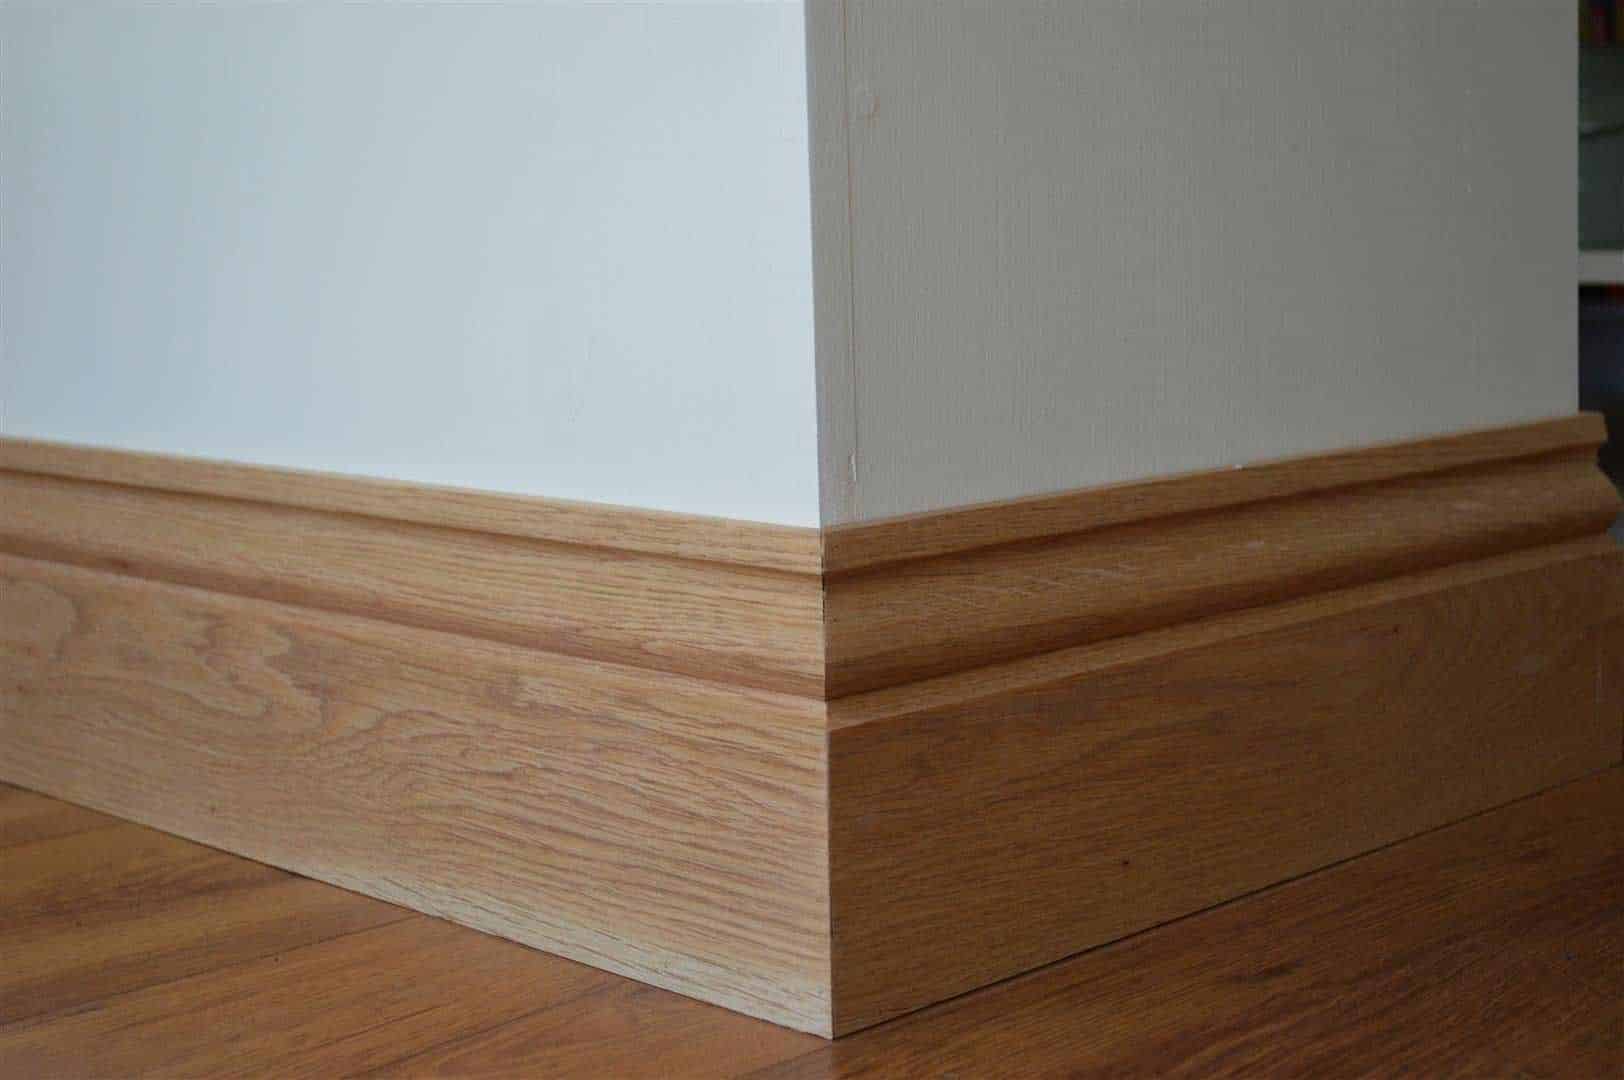 How To Match Baseboard